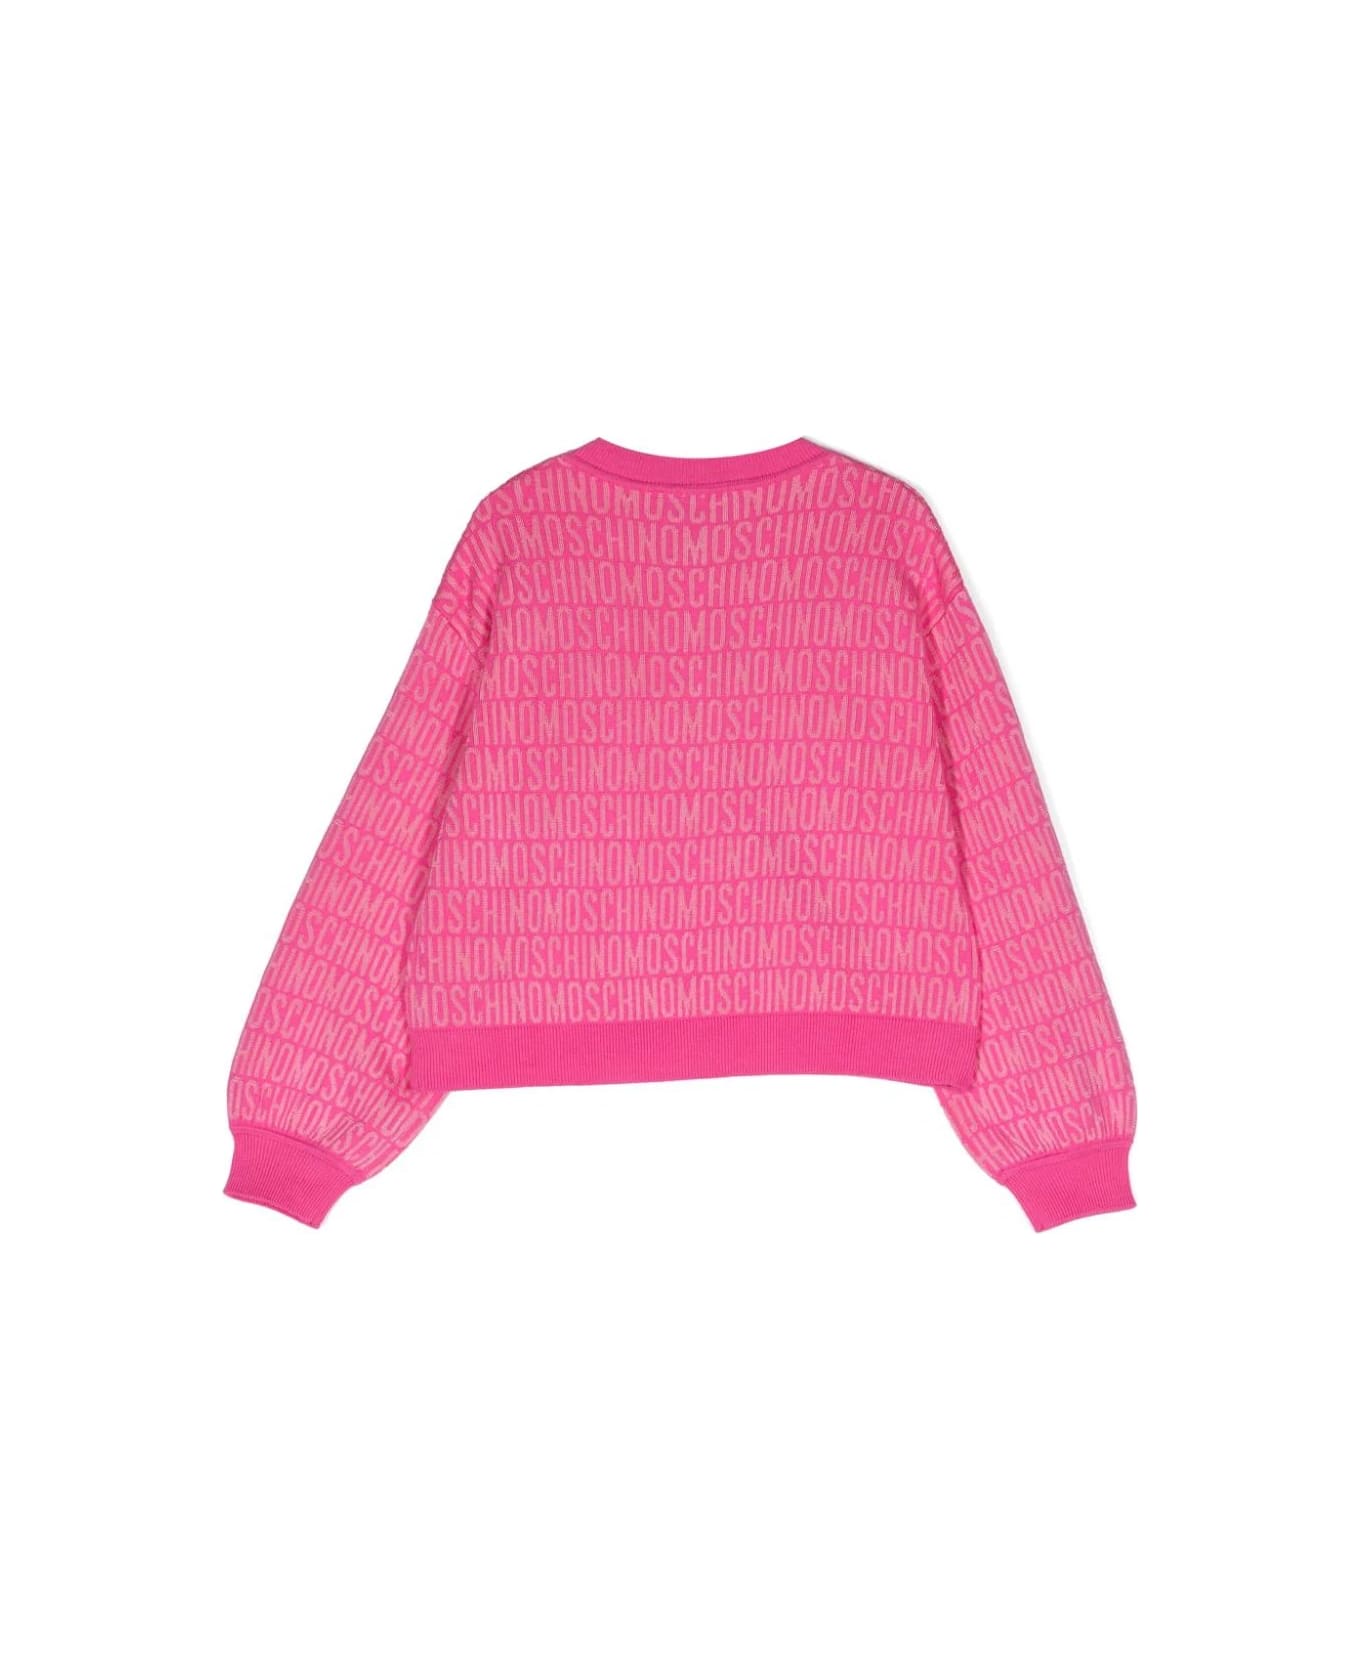 Moschino Fuchsia Cardigan With All-over Logo - Pink